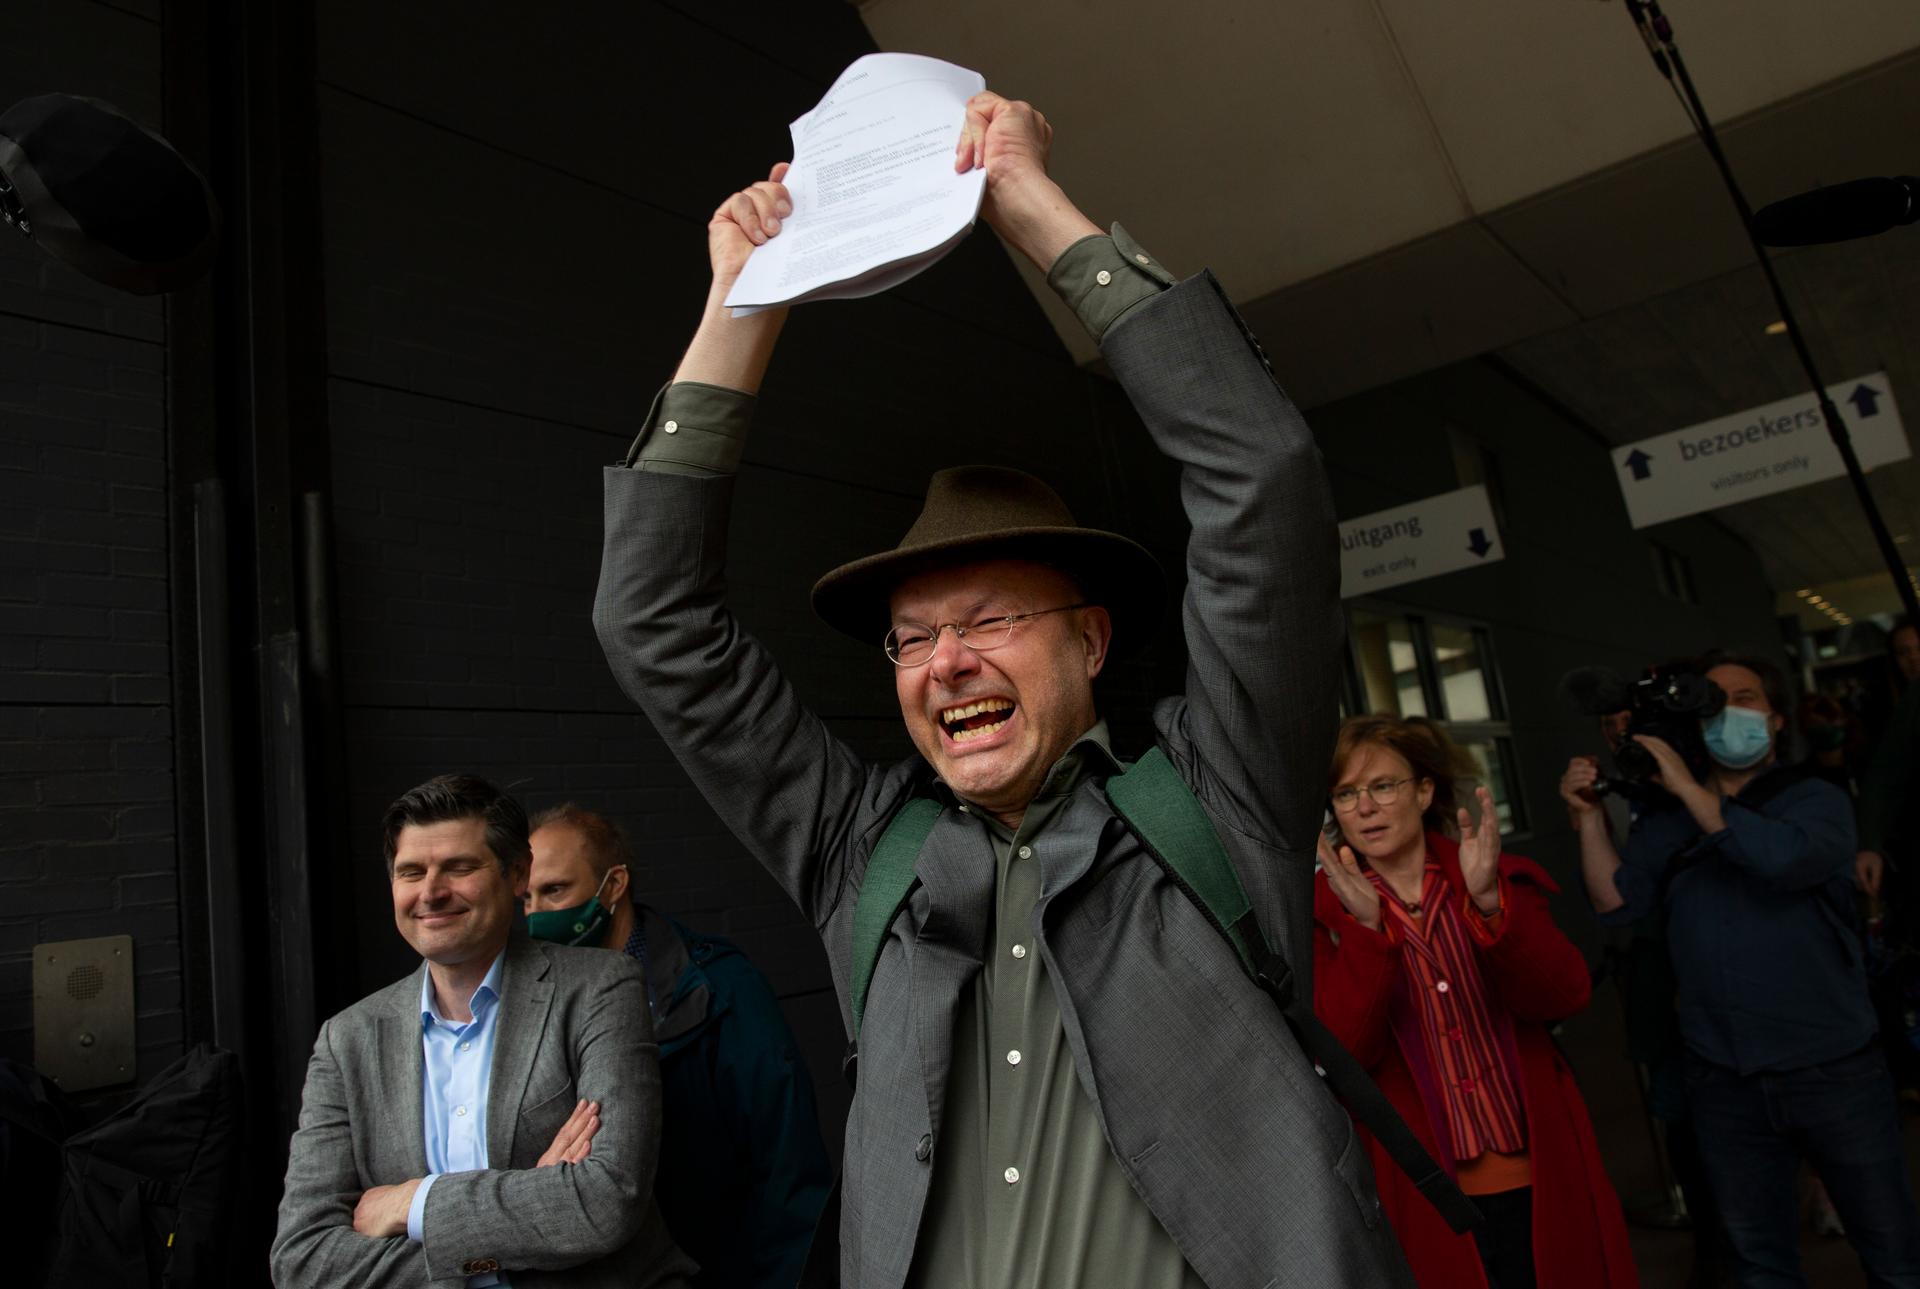 A man victoriously holds up a piece of paper and smiles as other people around him also smile